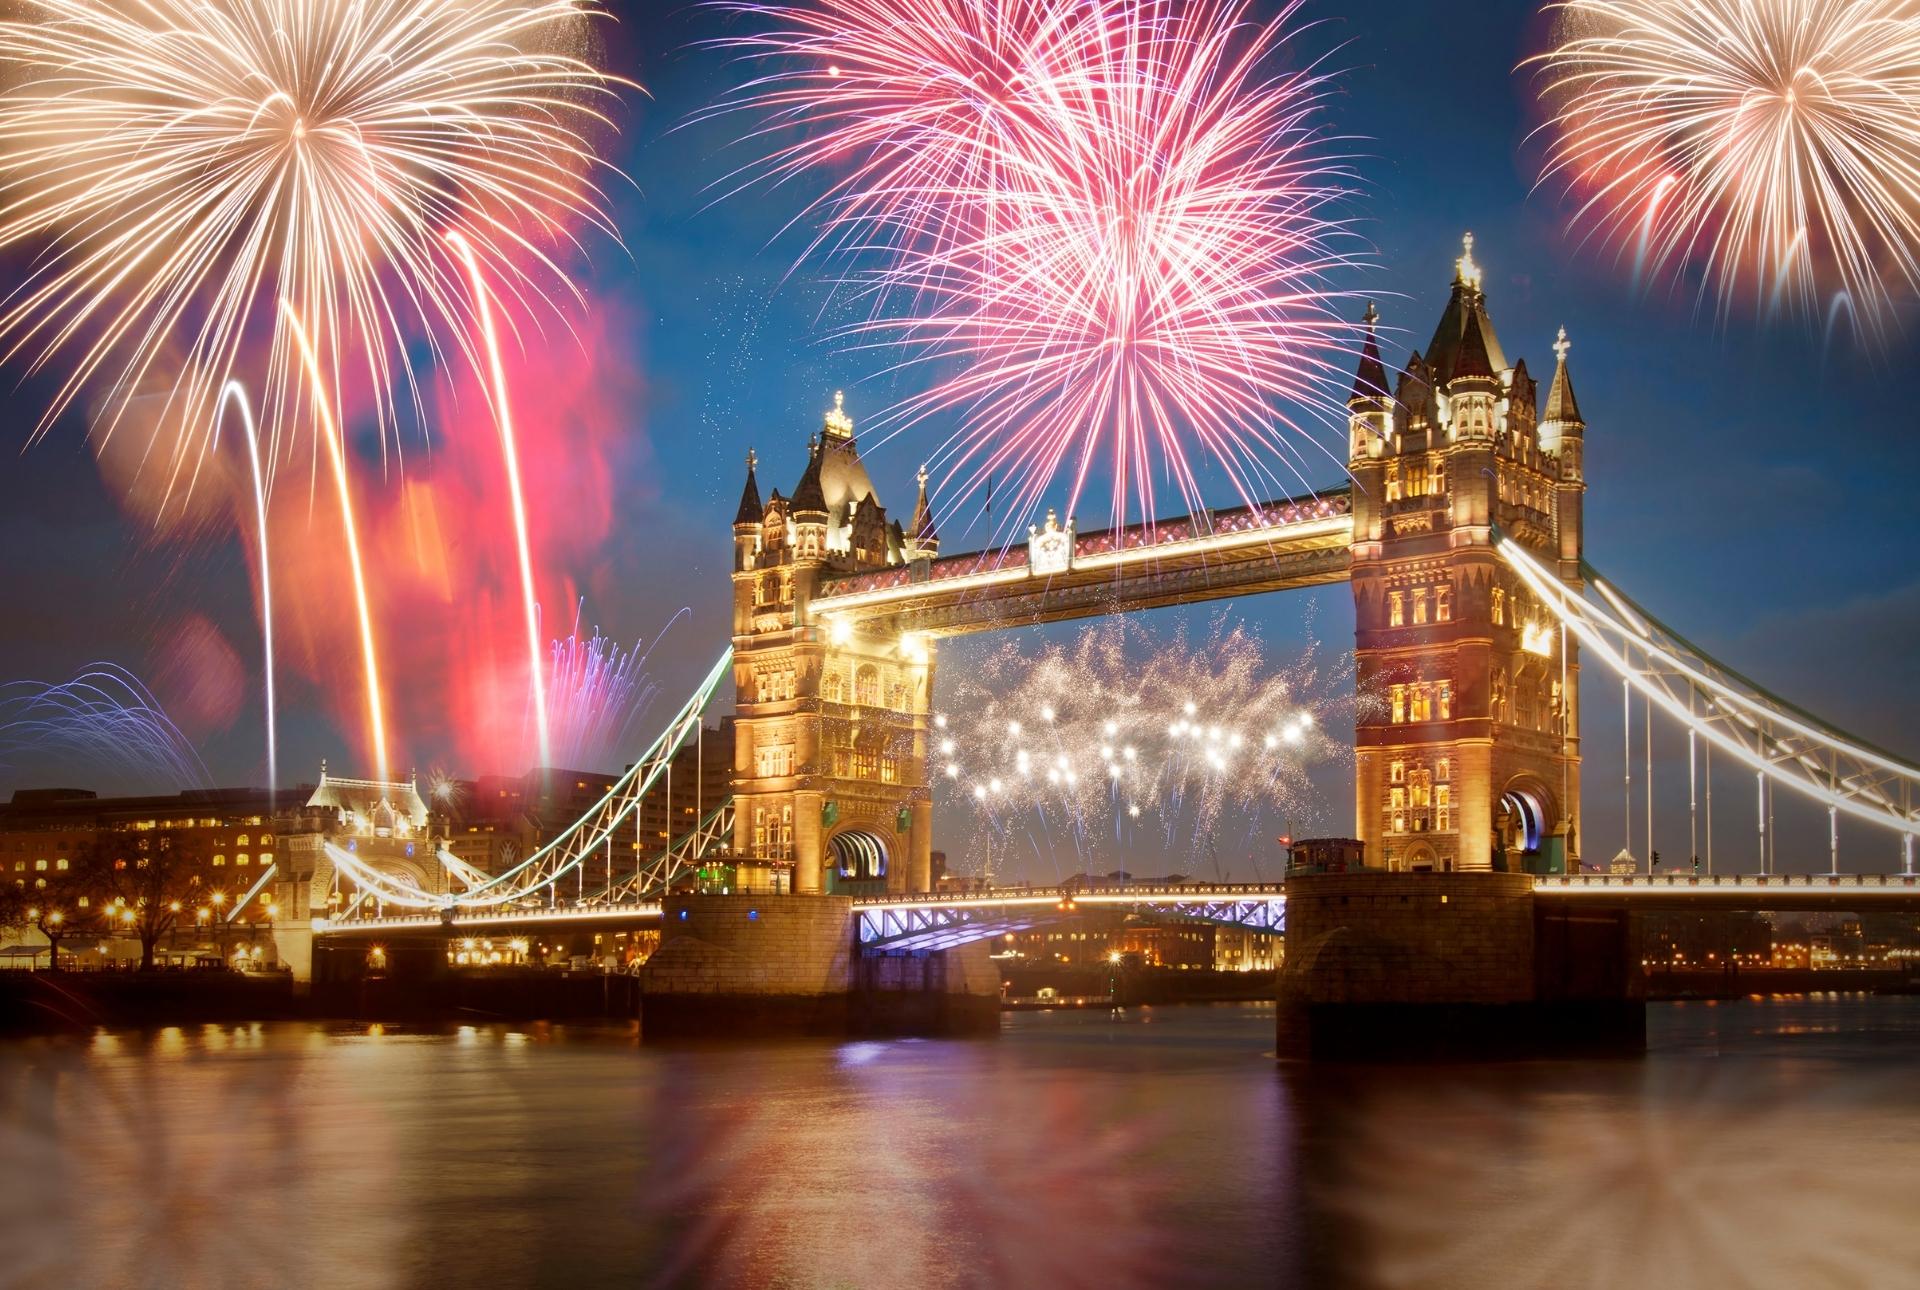 Top London Hotels to Stay at on New Year’s Eve